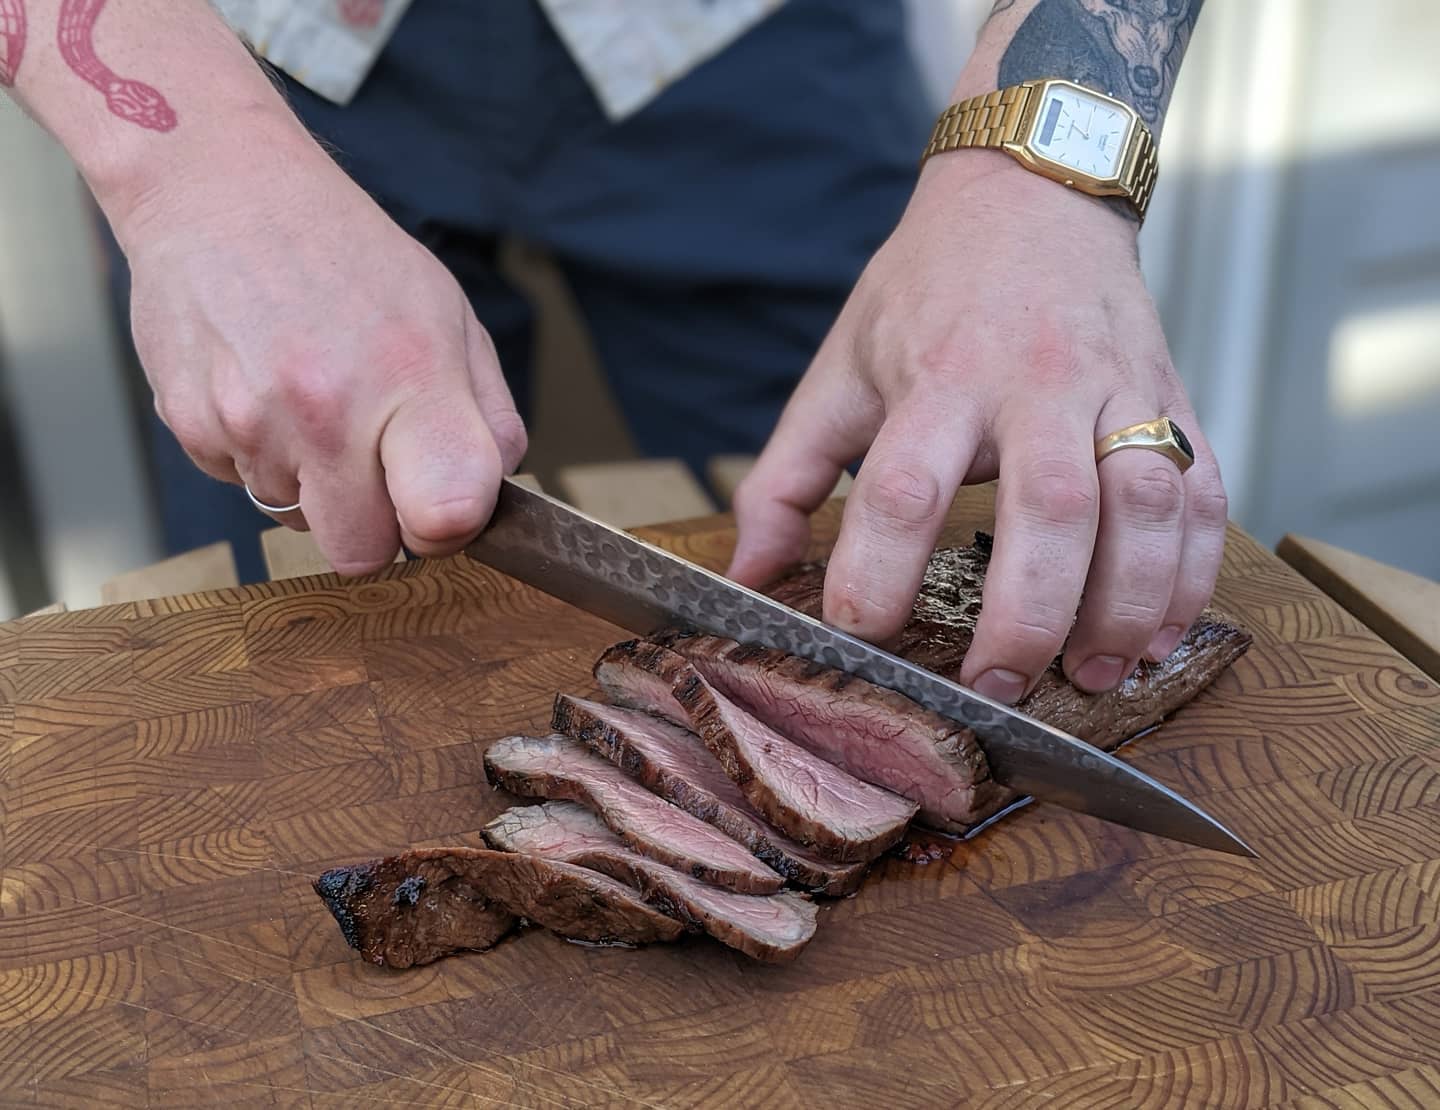 The Best Japanese Knives for Barbecue & Brisket